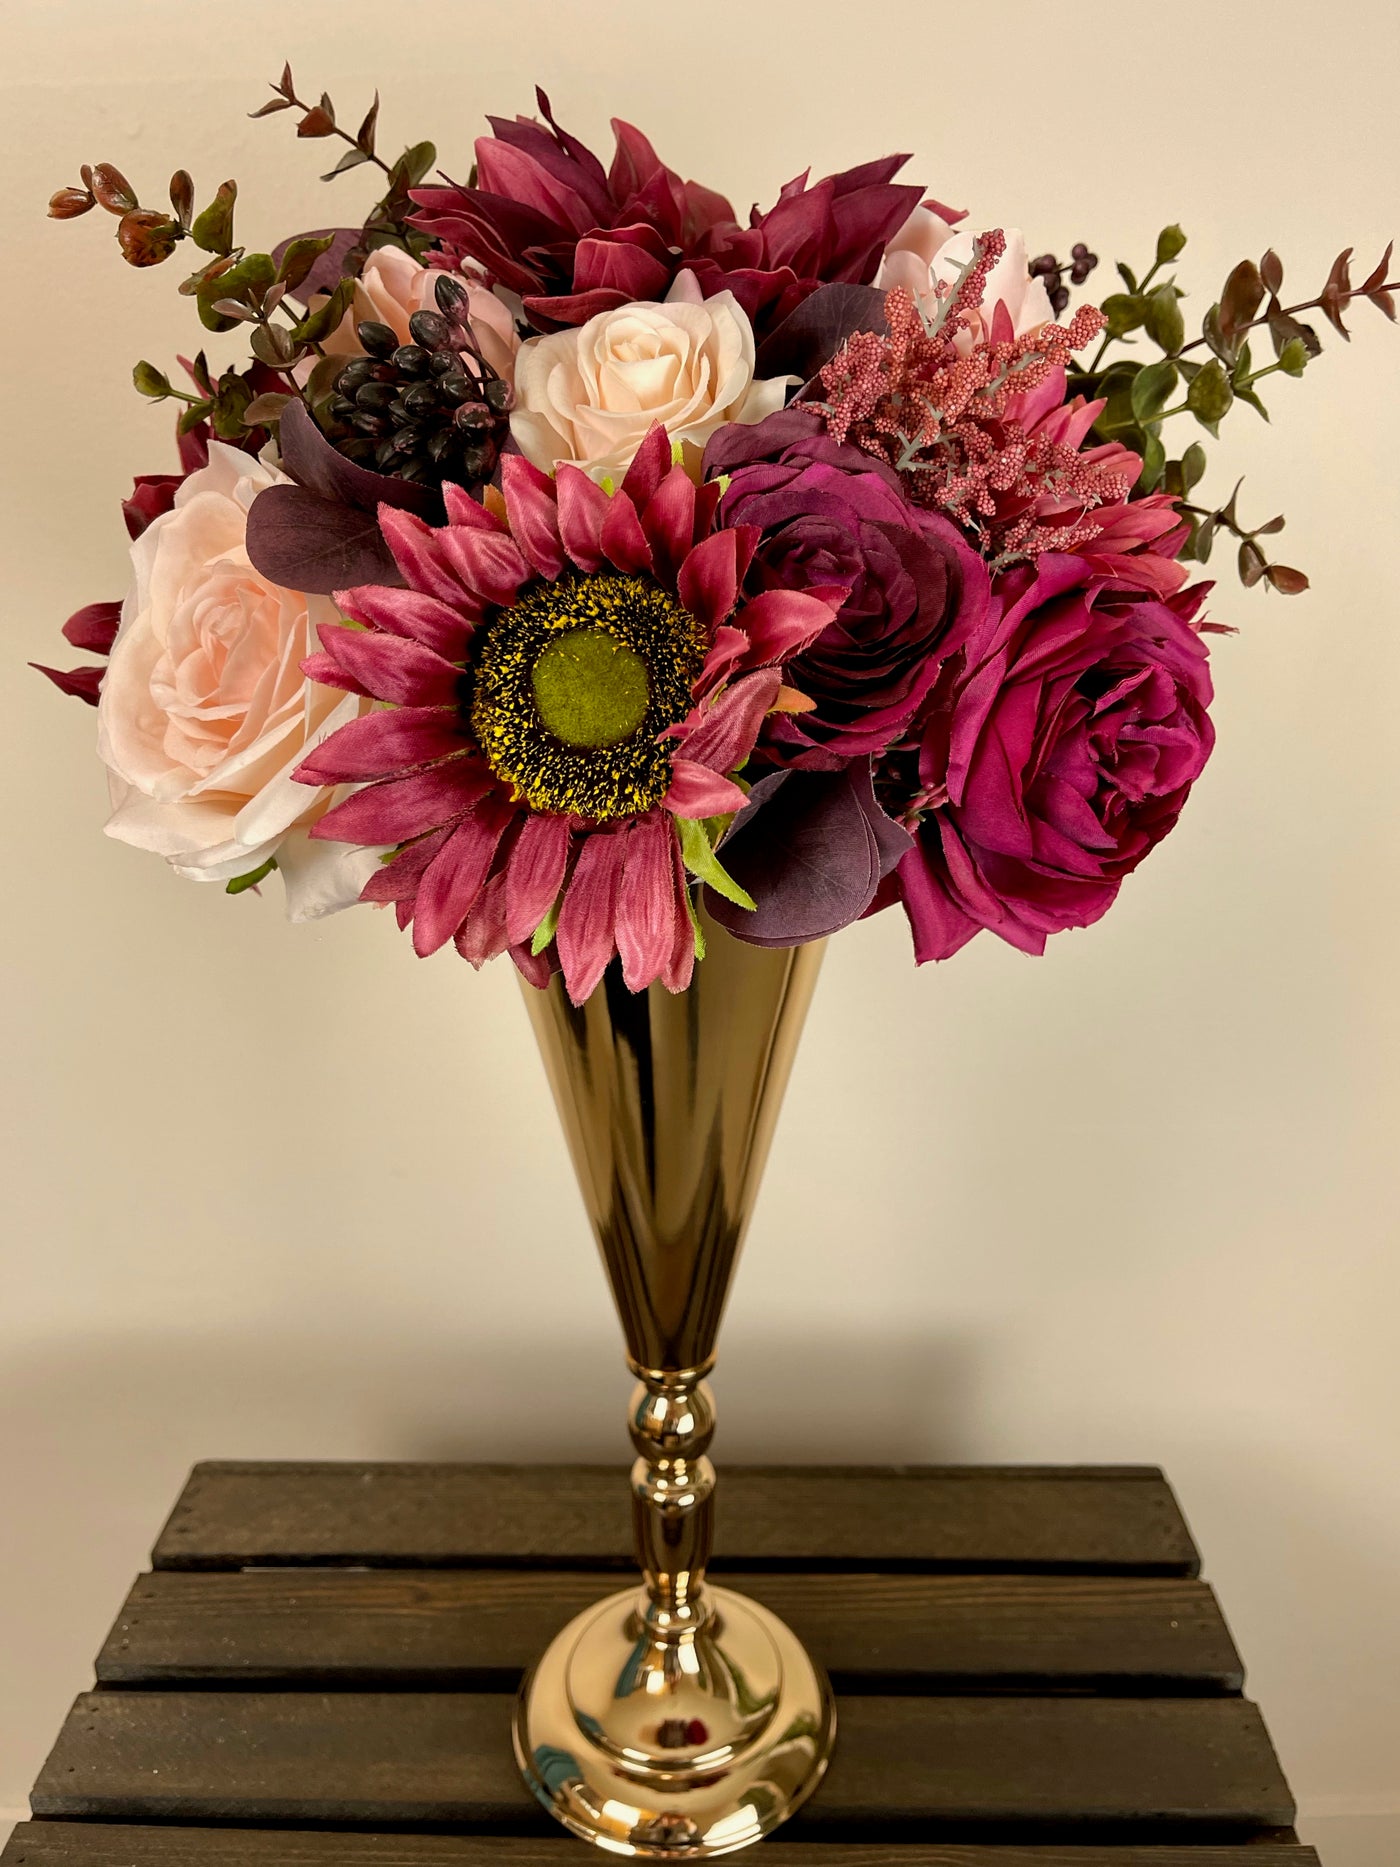 14 inch tall gold vase shown holding a colourful bouquet